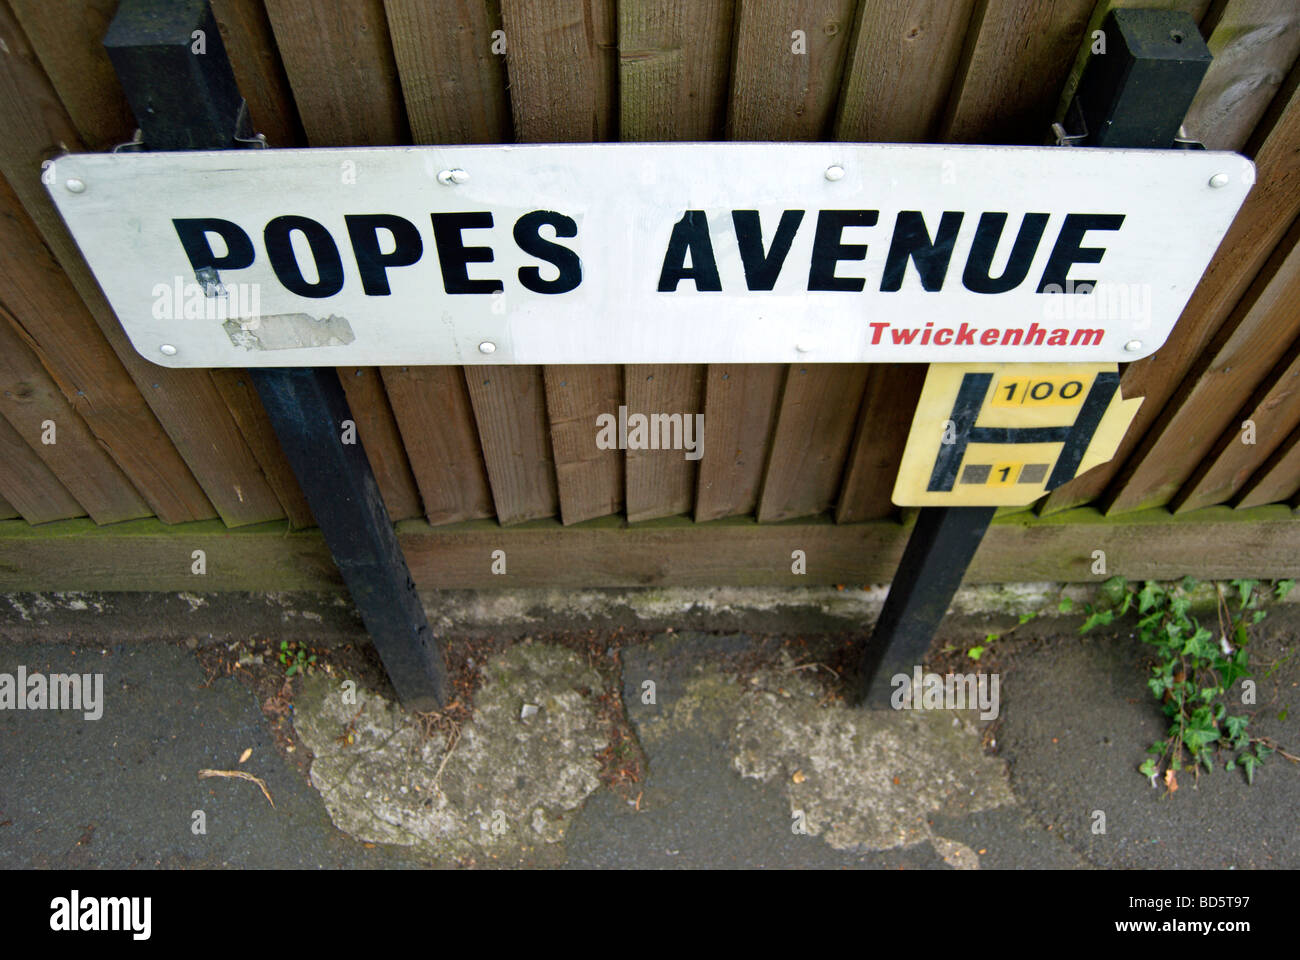 popes avenue, named after the 18th century satirical writer and local resident alexander pope, in twickenham, middlesex, england Stock Photo